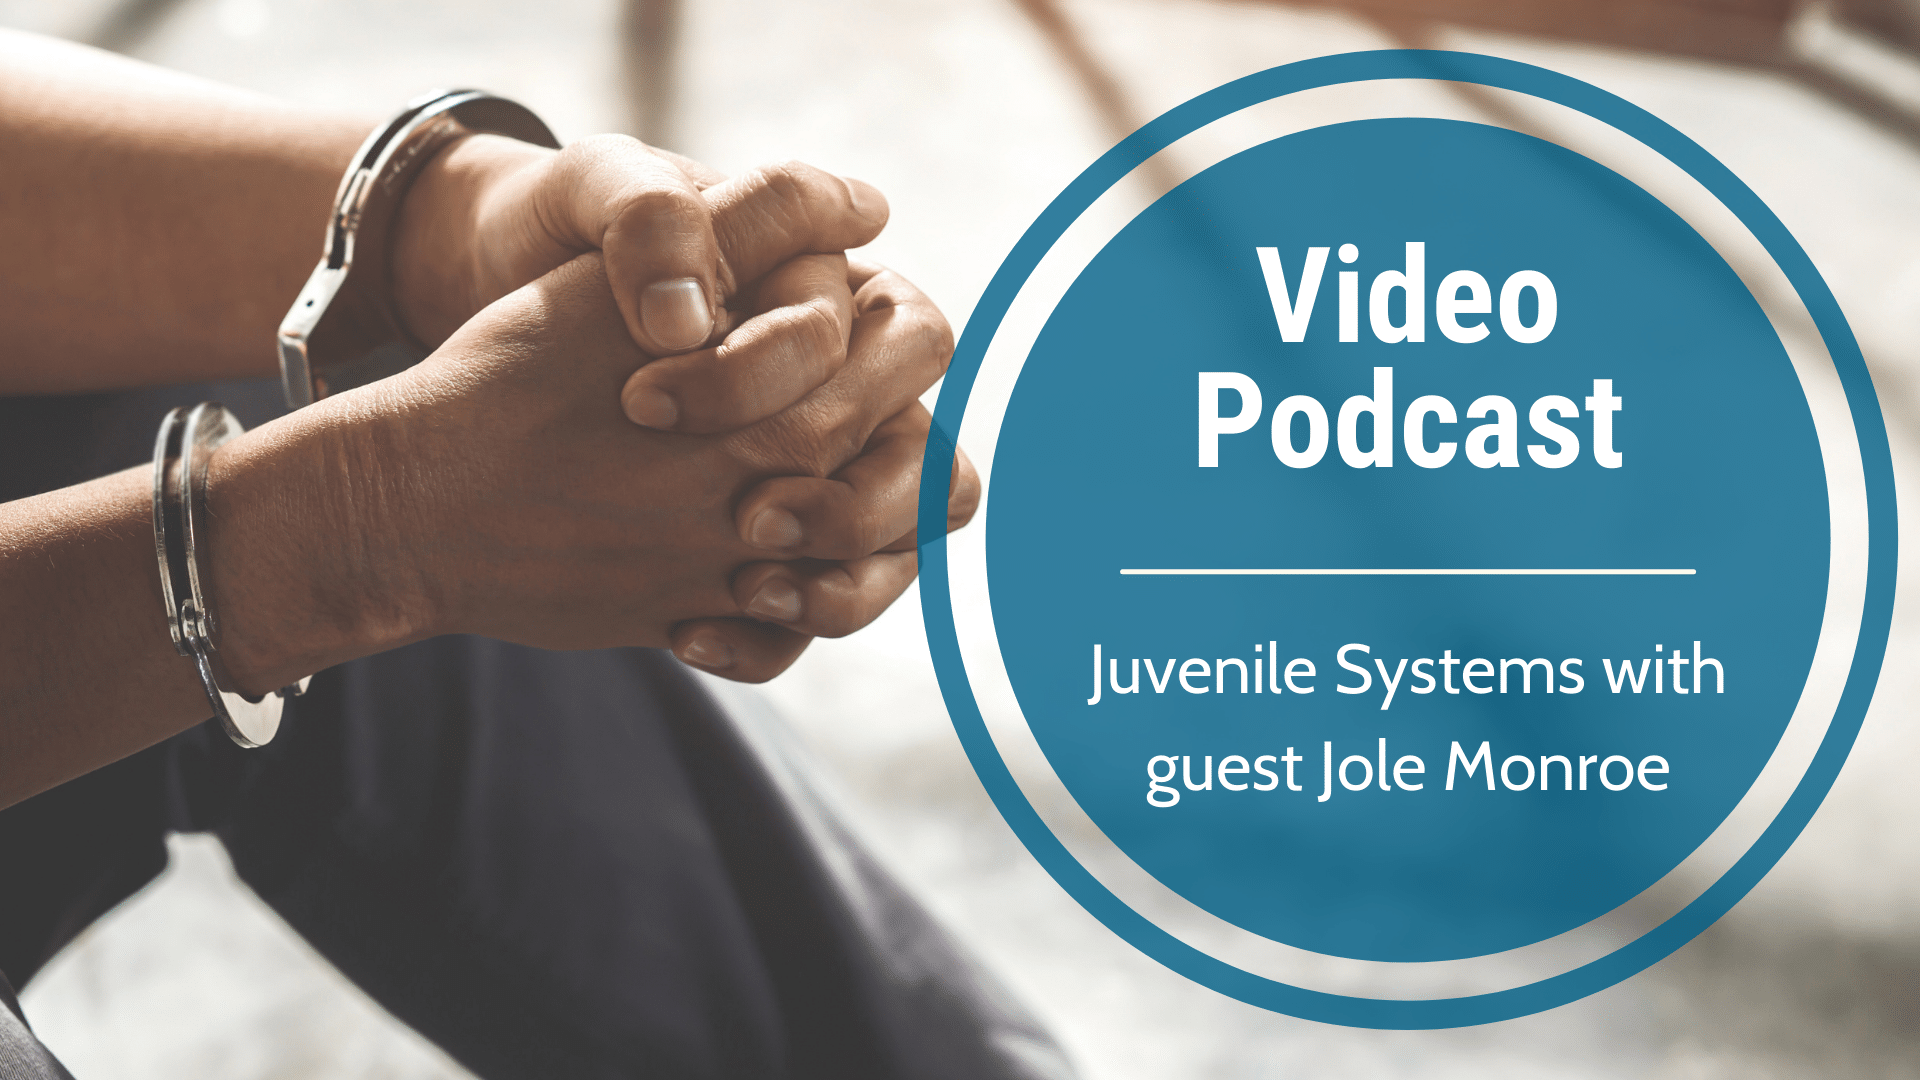 Video Podcast-Juvenile Systems with guest Jole Monroe Part 1